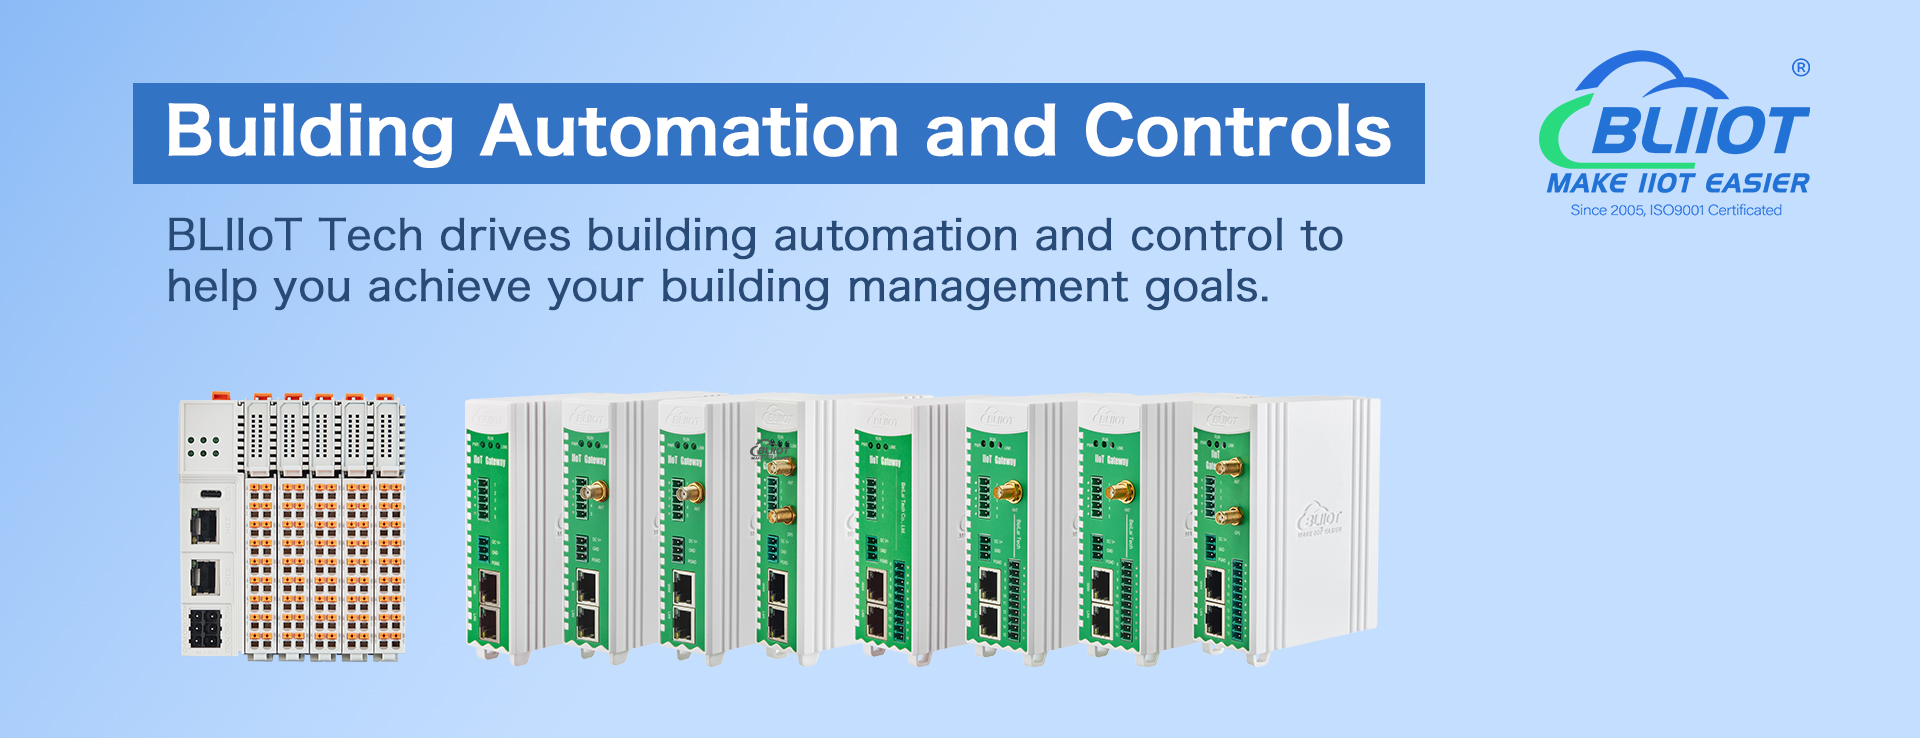 Building Automation and Control